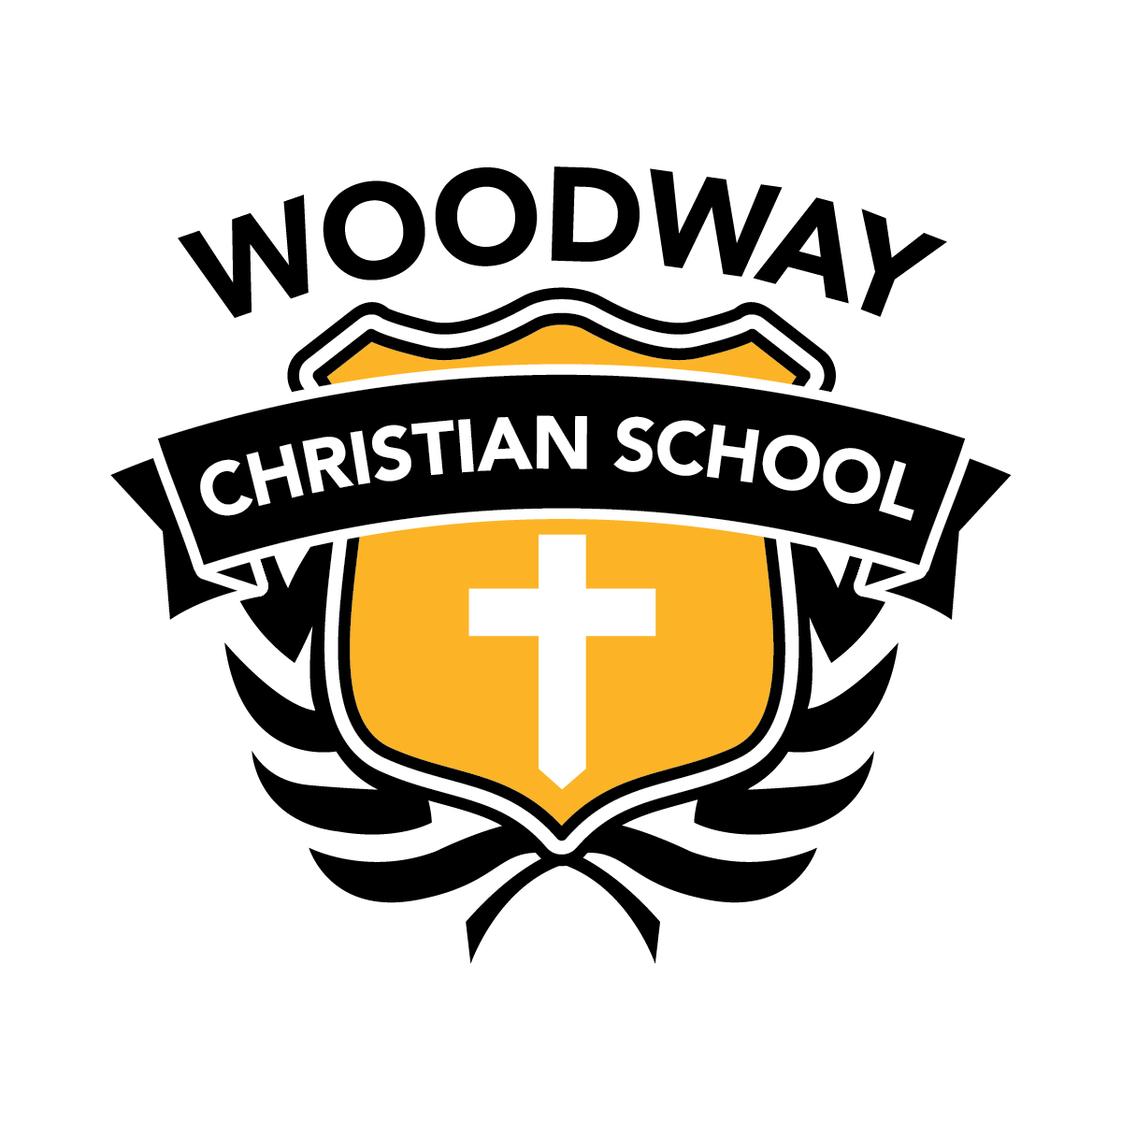 Woodway Christian School Photo #1 - Christian Leaders Start here.